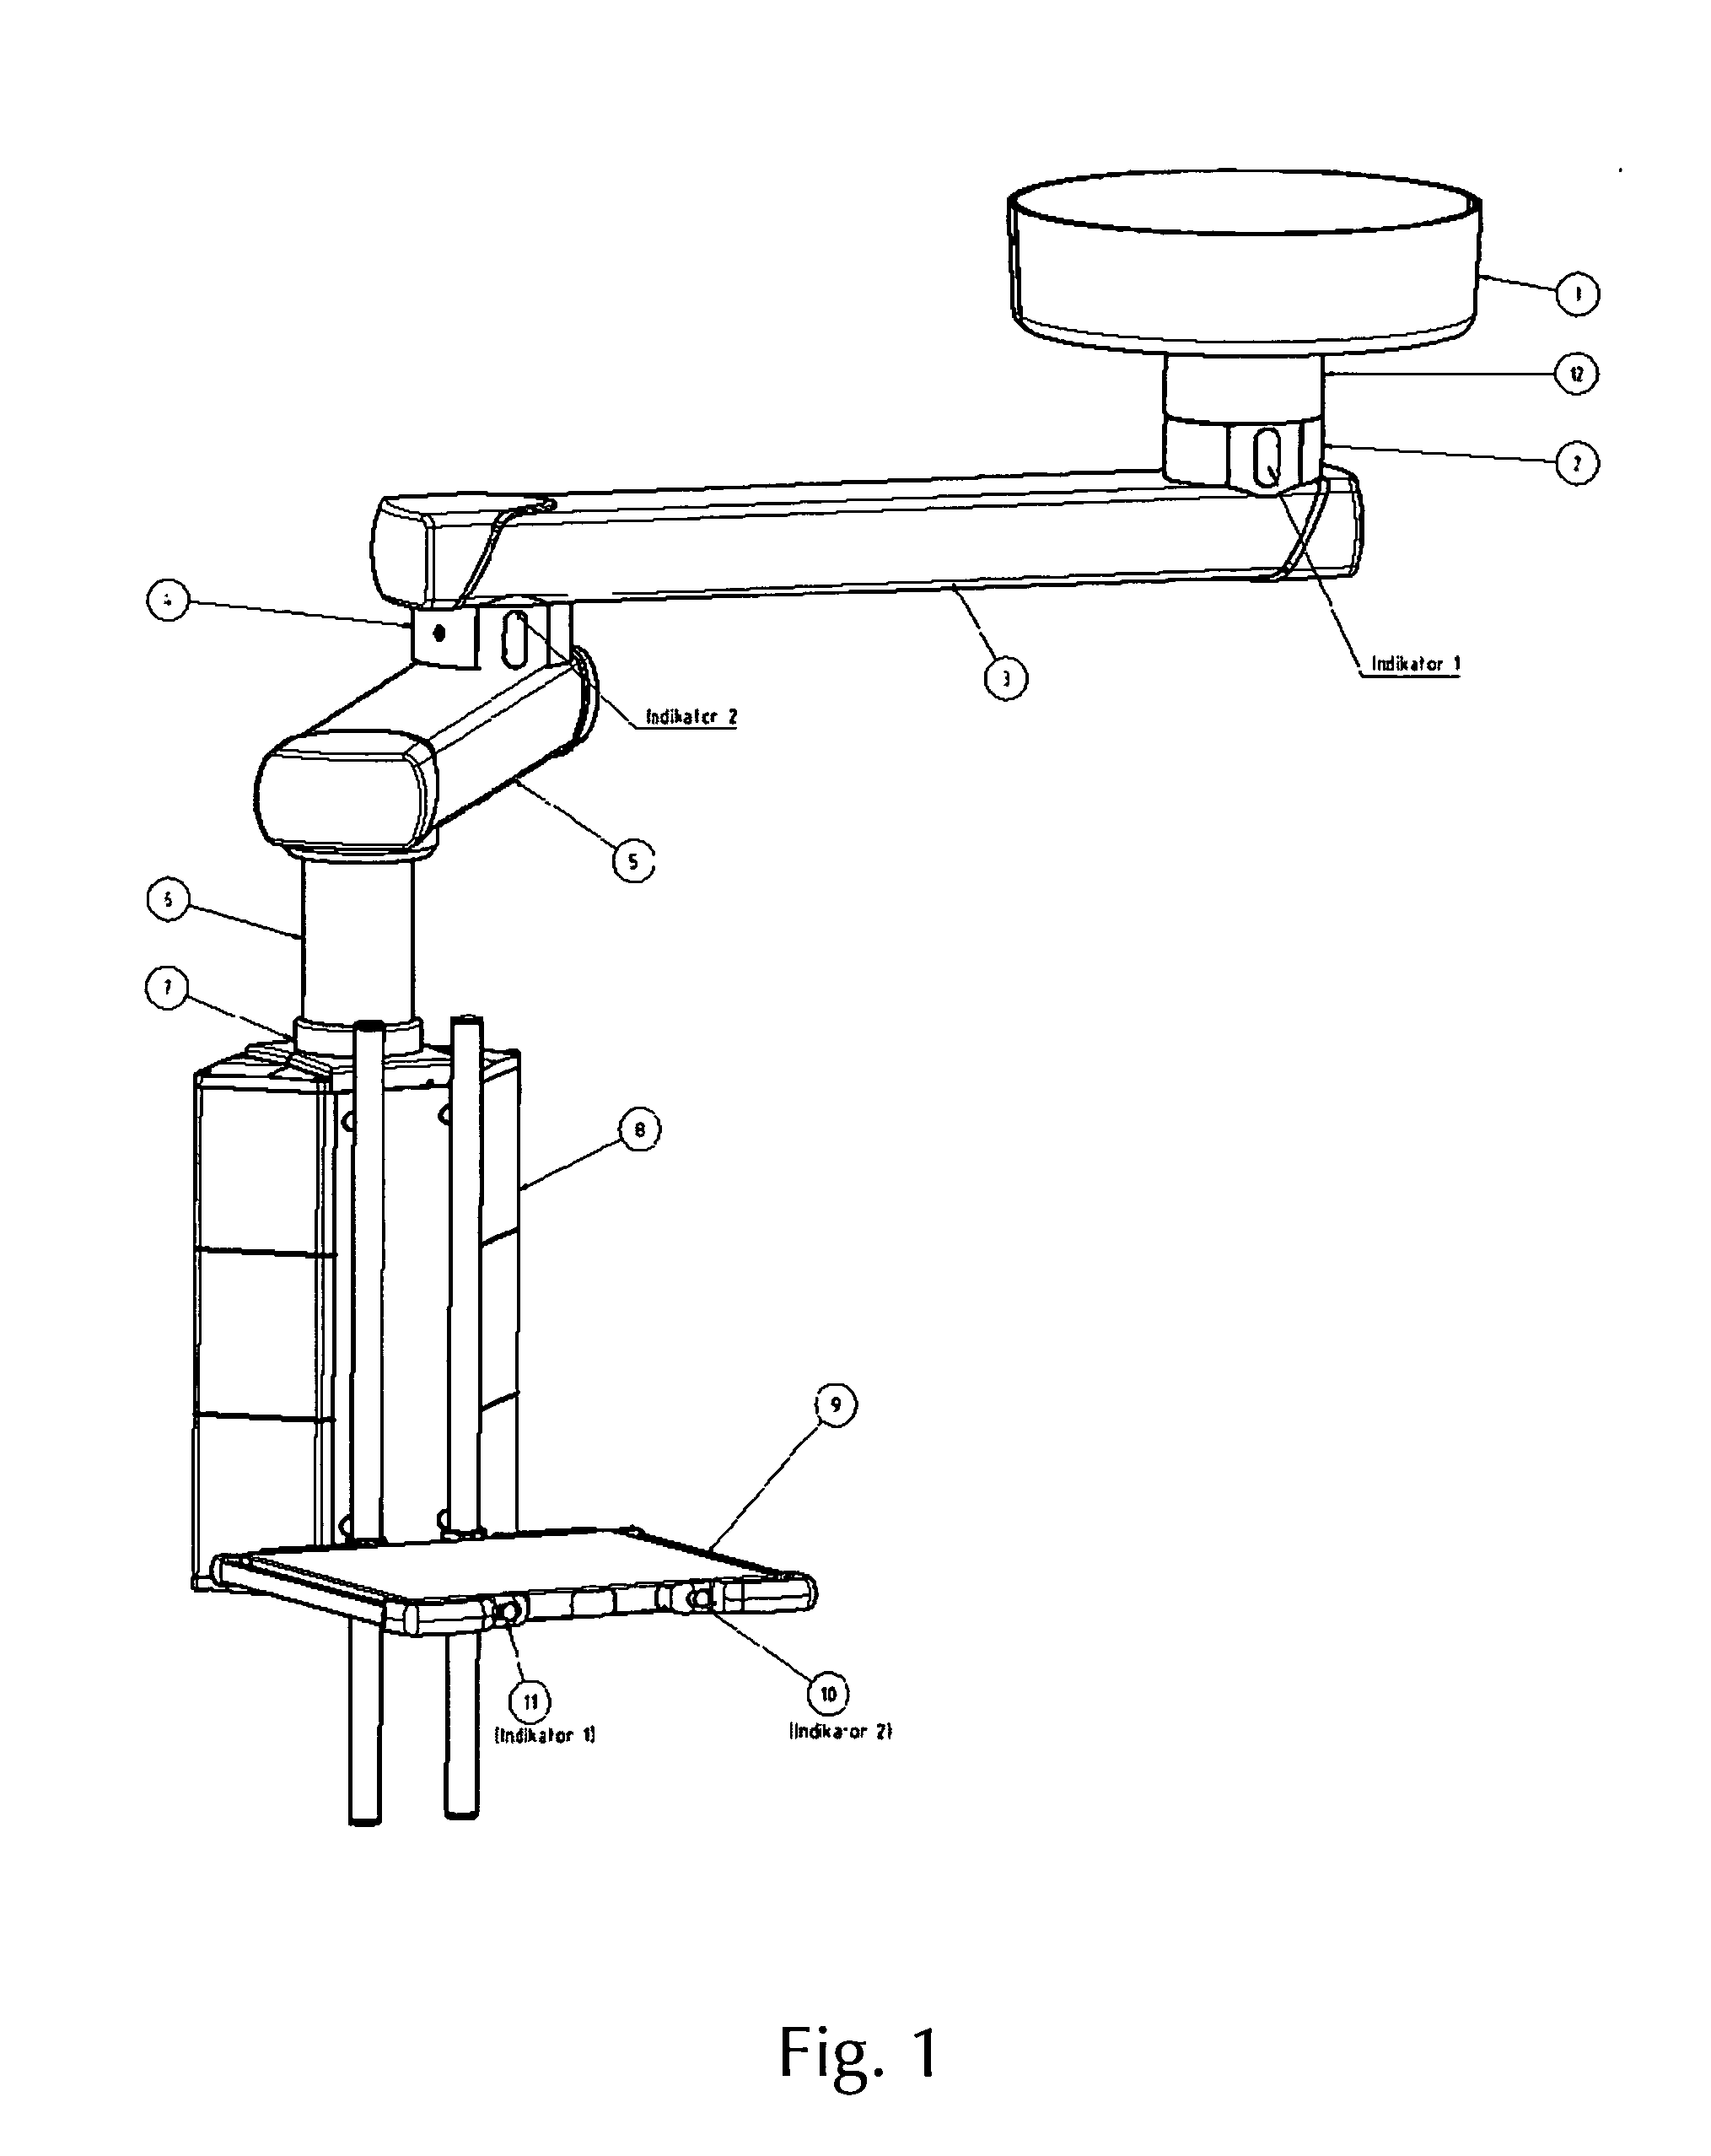 Support system comprising a control unit